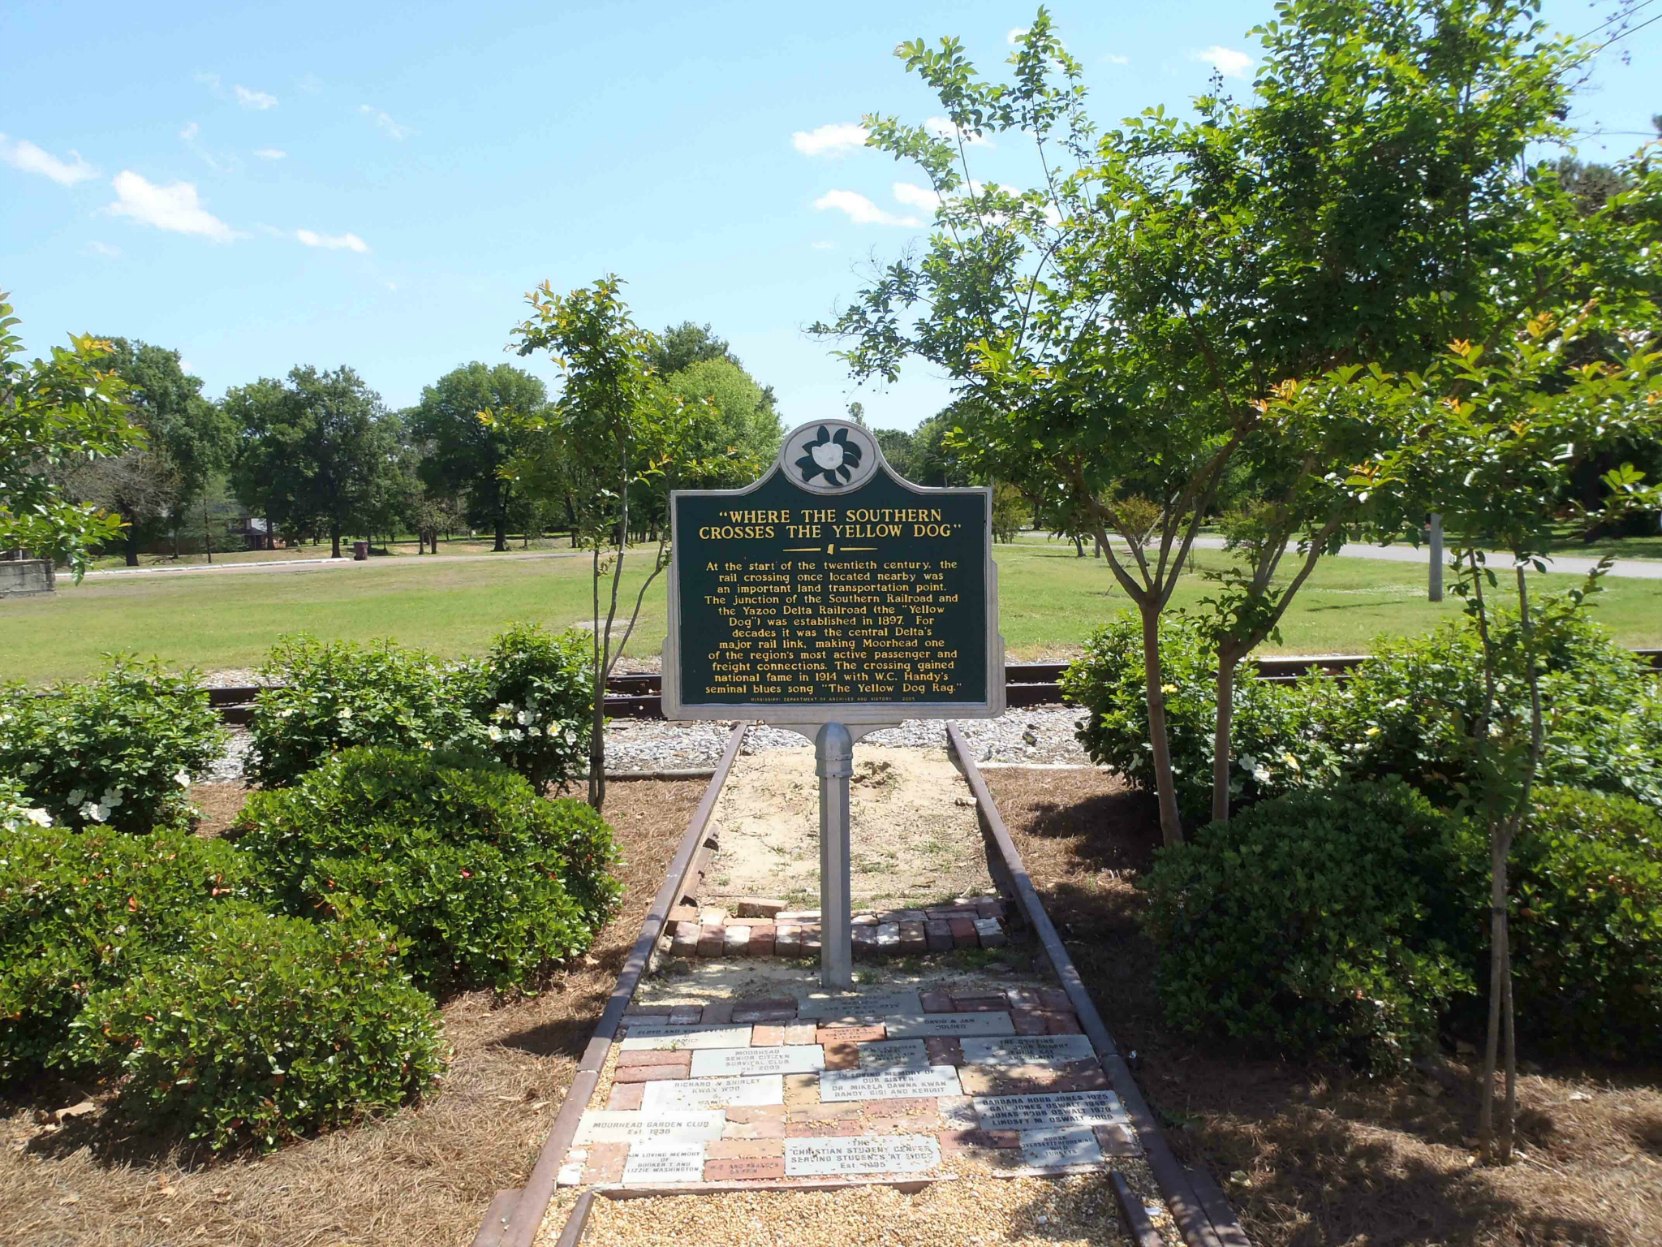 The Mississippi Department of Archives & History marker "Where The Southern Crosses The Dog", Moorhead, Mississippi